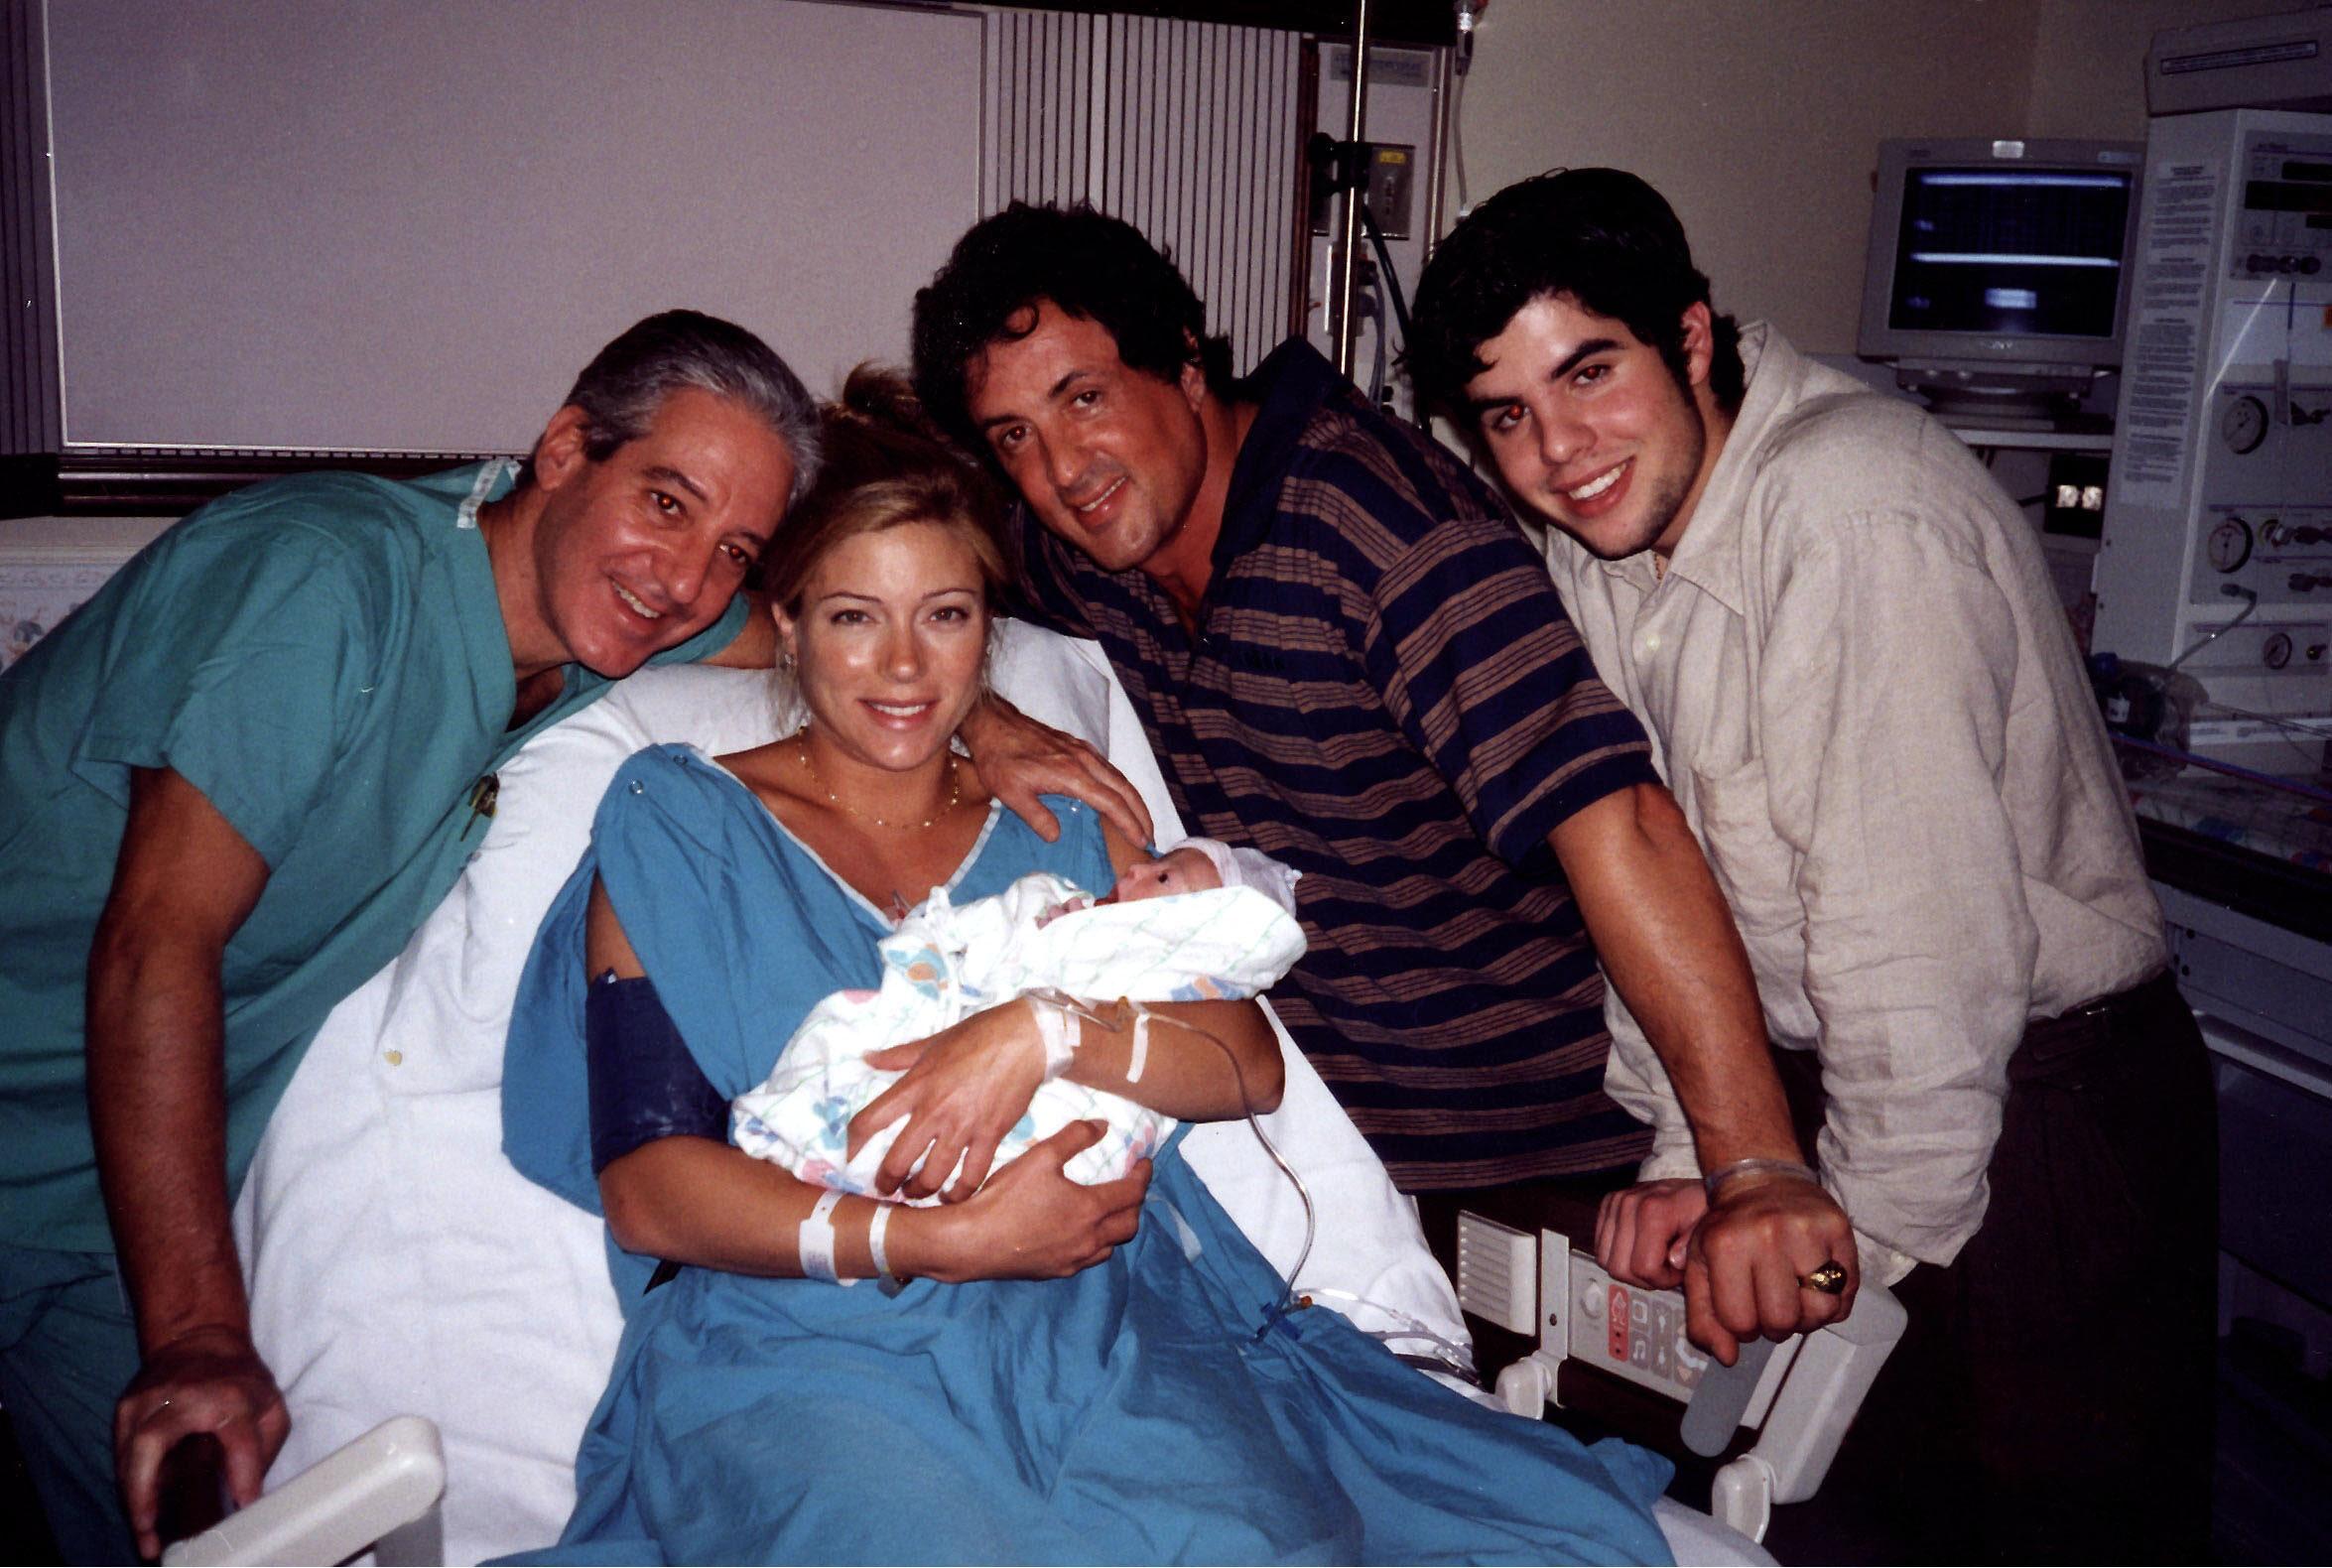 ©1996 RAMEY PHOTO AGENCY 310-828-3445FIRST PICTURES OF SLY STALLONE & JENNIFER FLAVIN'S BABY GIRL Their baby girl, Sophia, was born on Sunday, September 1st, 1996, in a hospital in Miami, FL. Pictured with the new happy family is Sage Stallone (son of ex-wife, Sacha) and the doctor that delivered Sophia. 9-4-1996.BE (Mega Agency TagID: MEGAR138547_2.jpg) [Photo via Mega Agency]